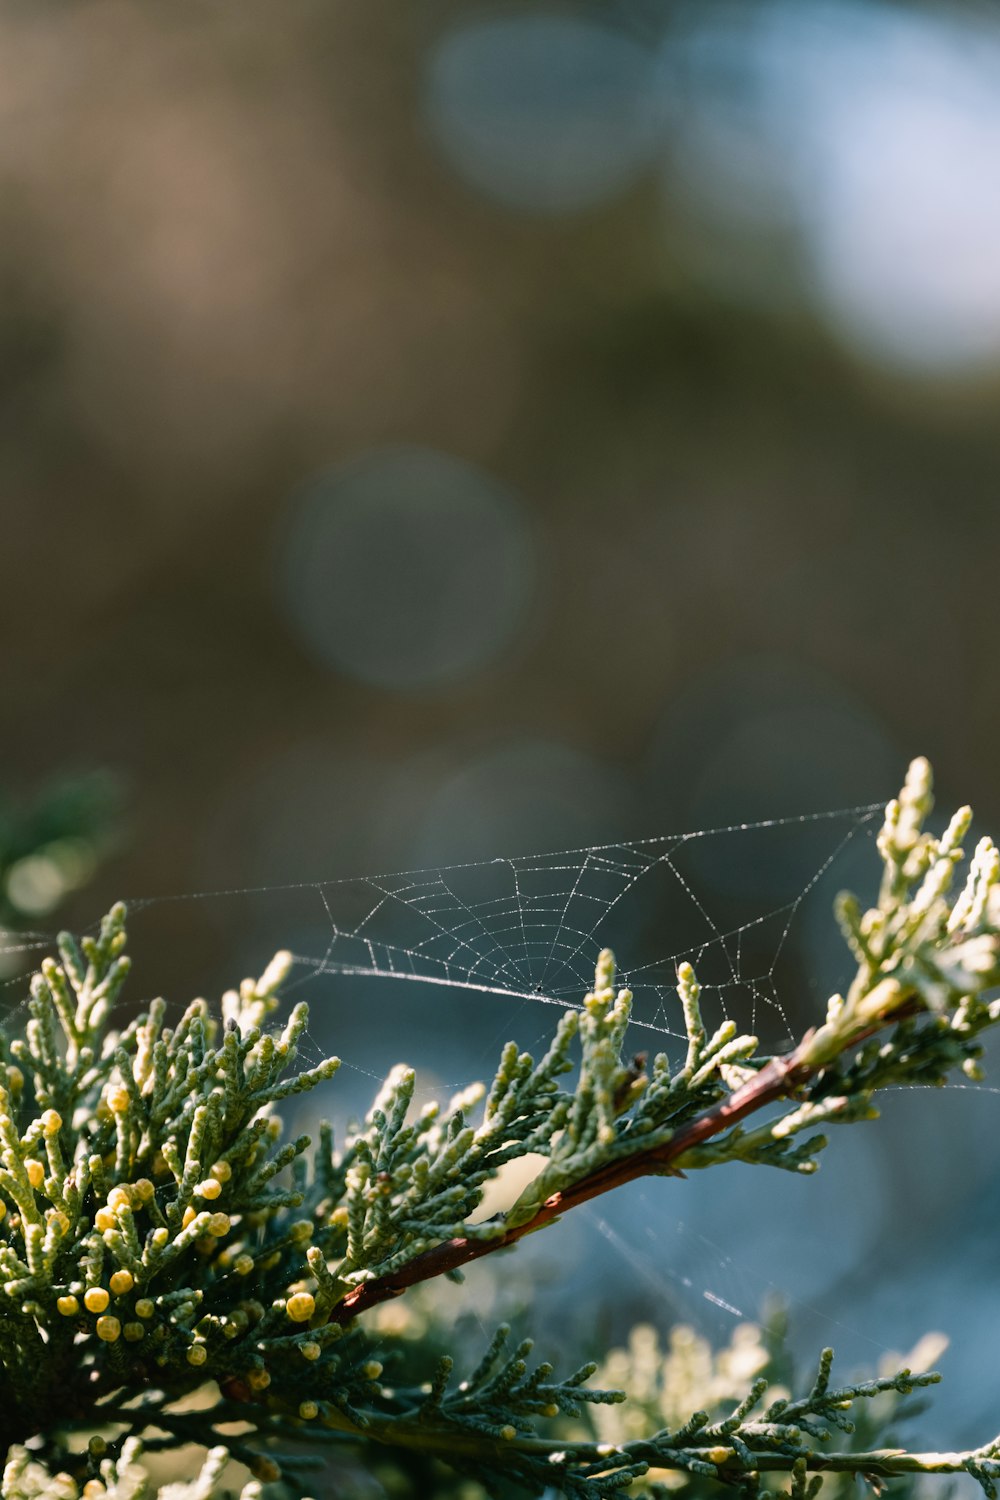 a close up of a spider web on a tree branch